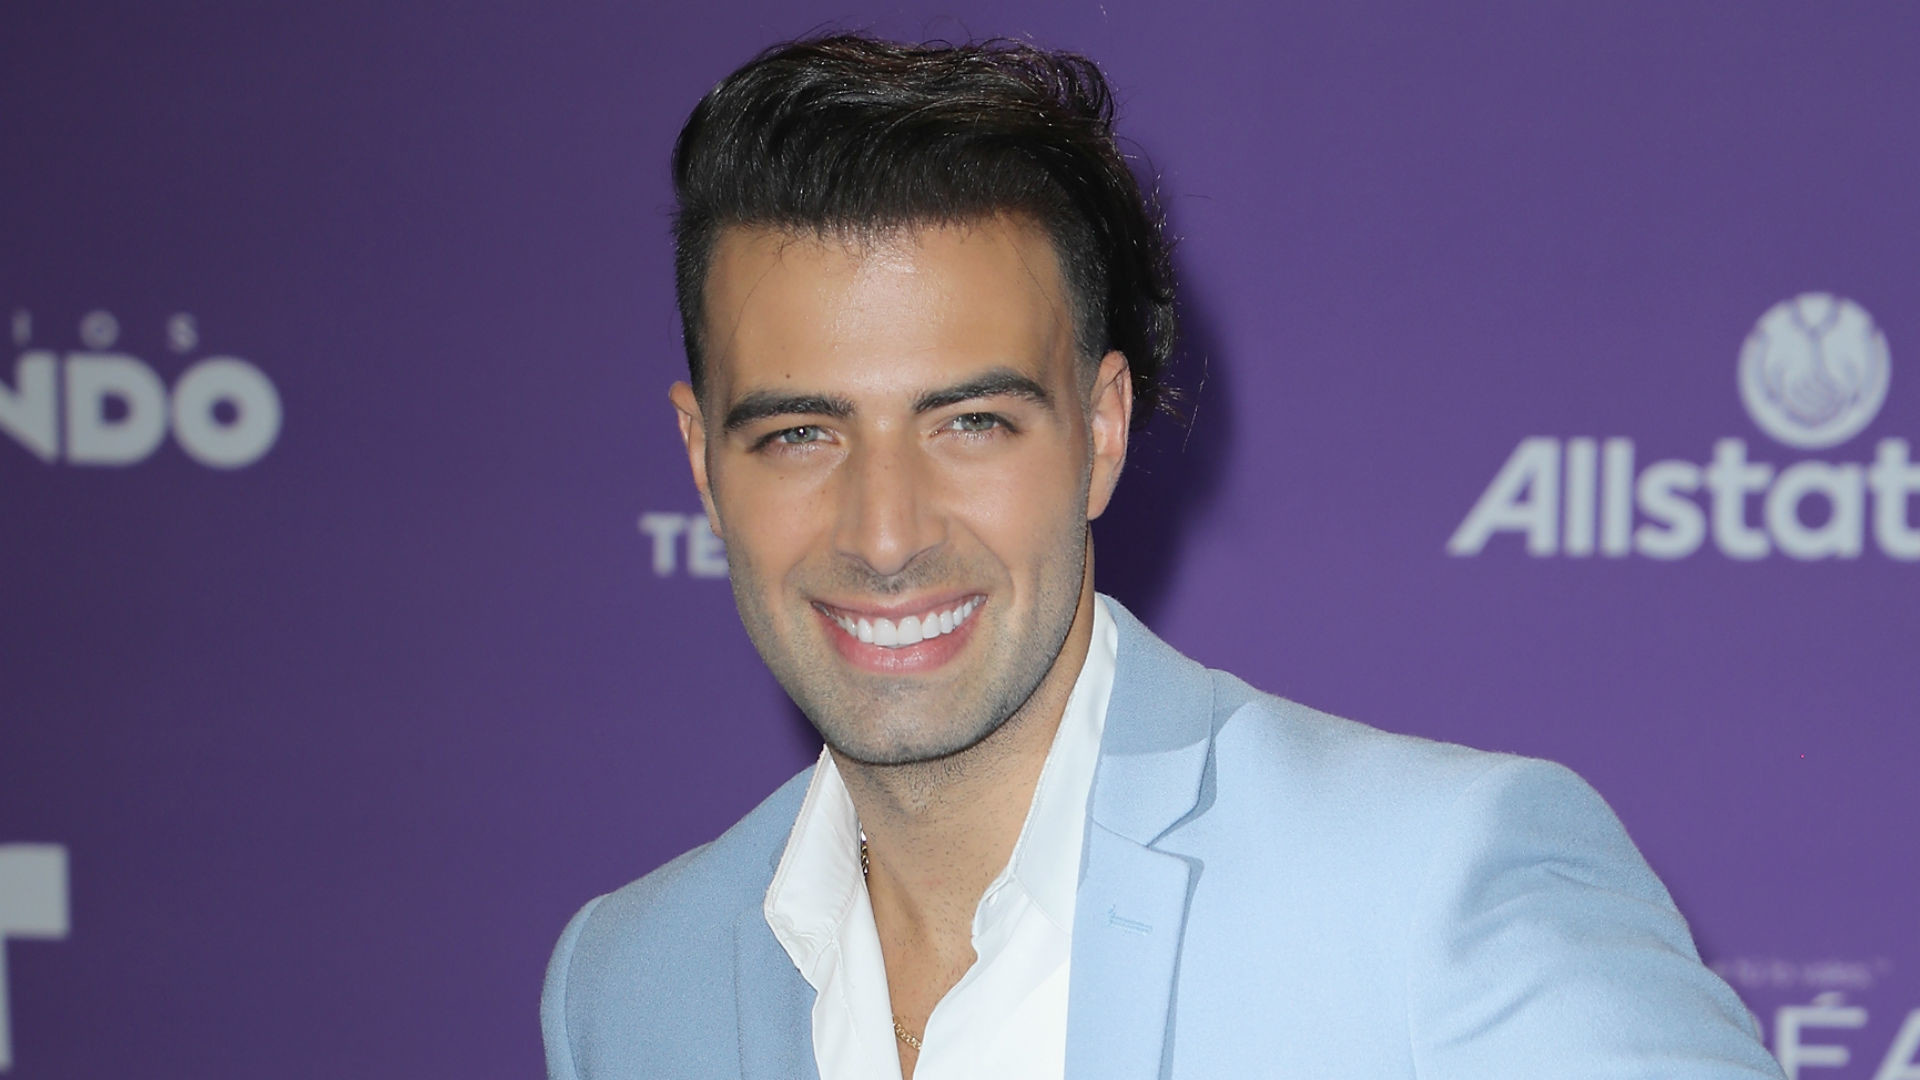 Jencarlos Canela 2018 wallpapers, Background pictures, Celebrity wallpapers, Stylish photoshoots, 1920x1080 Full HD Desktop